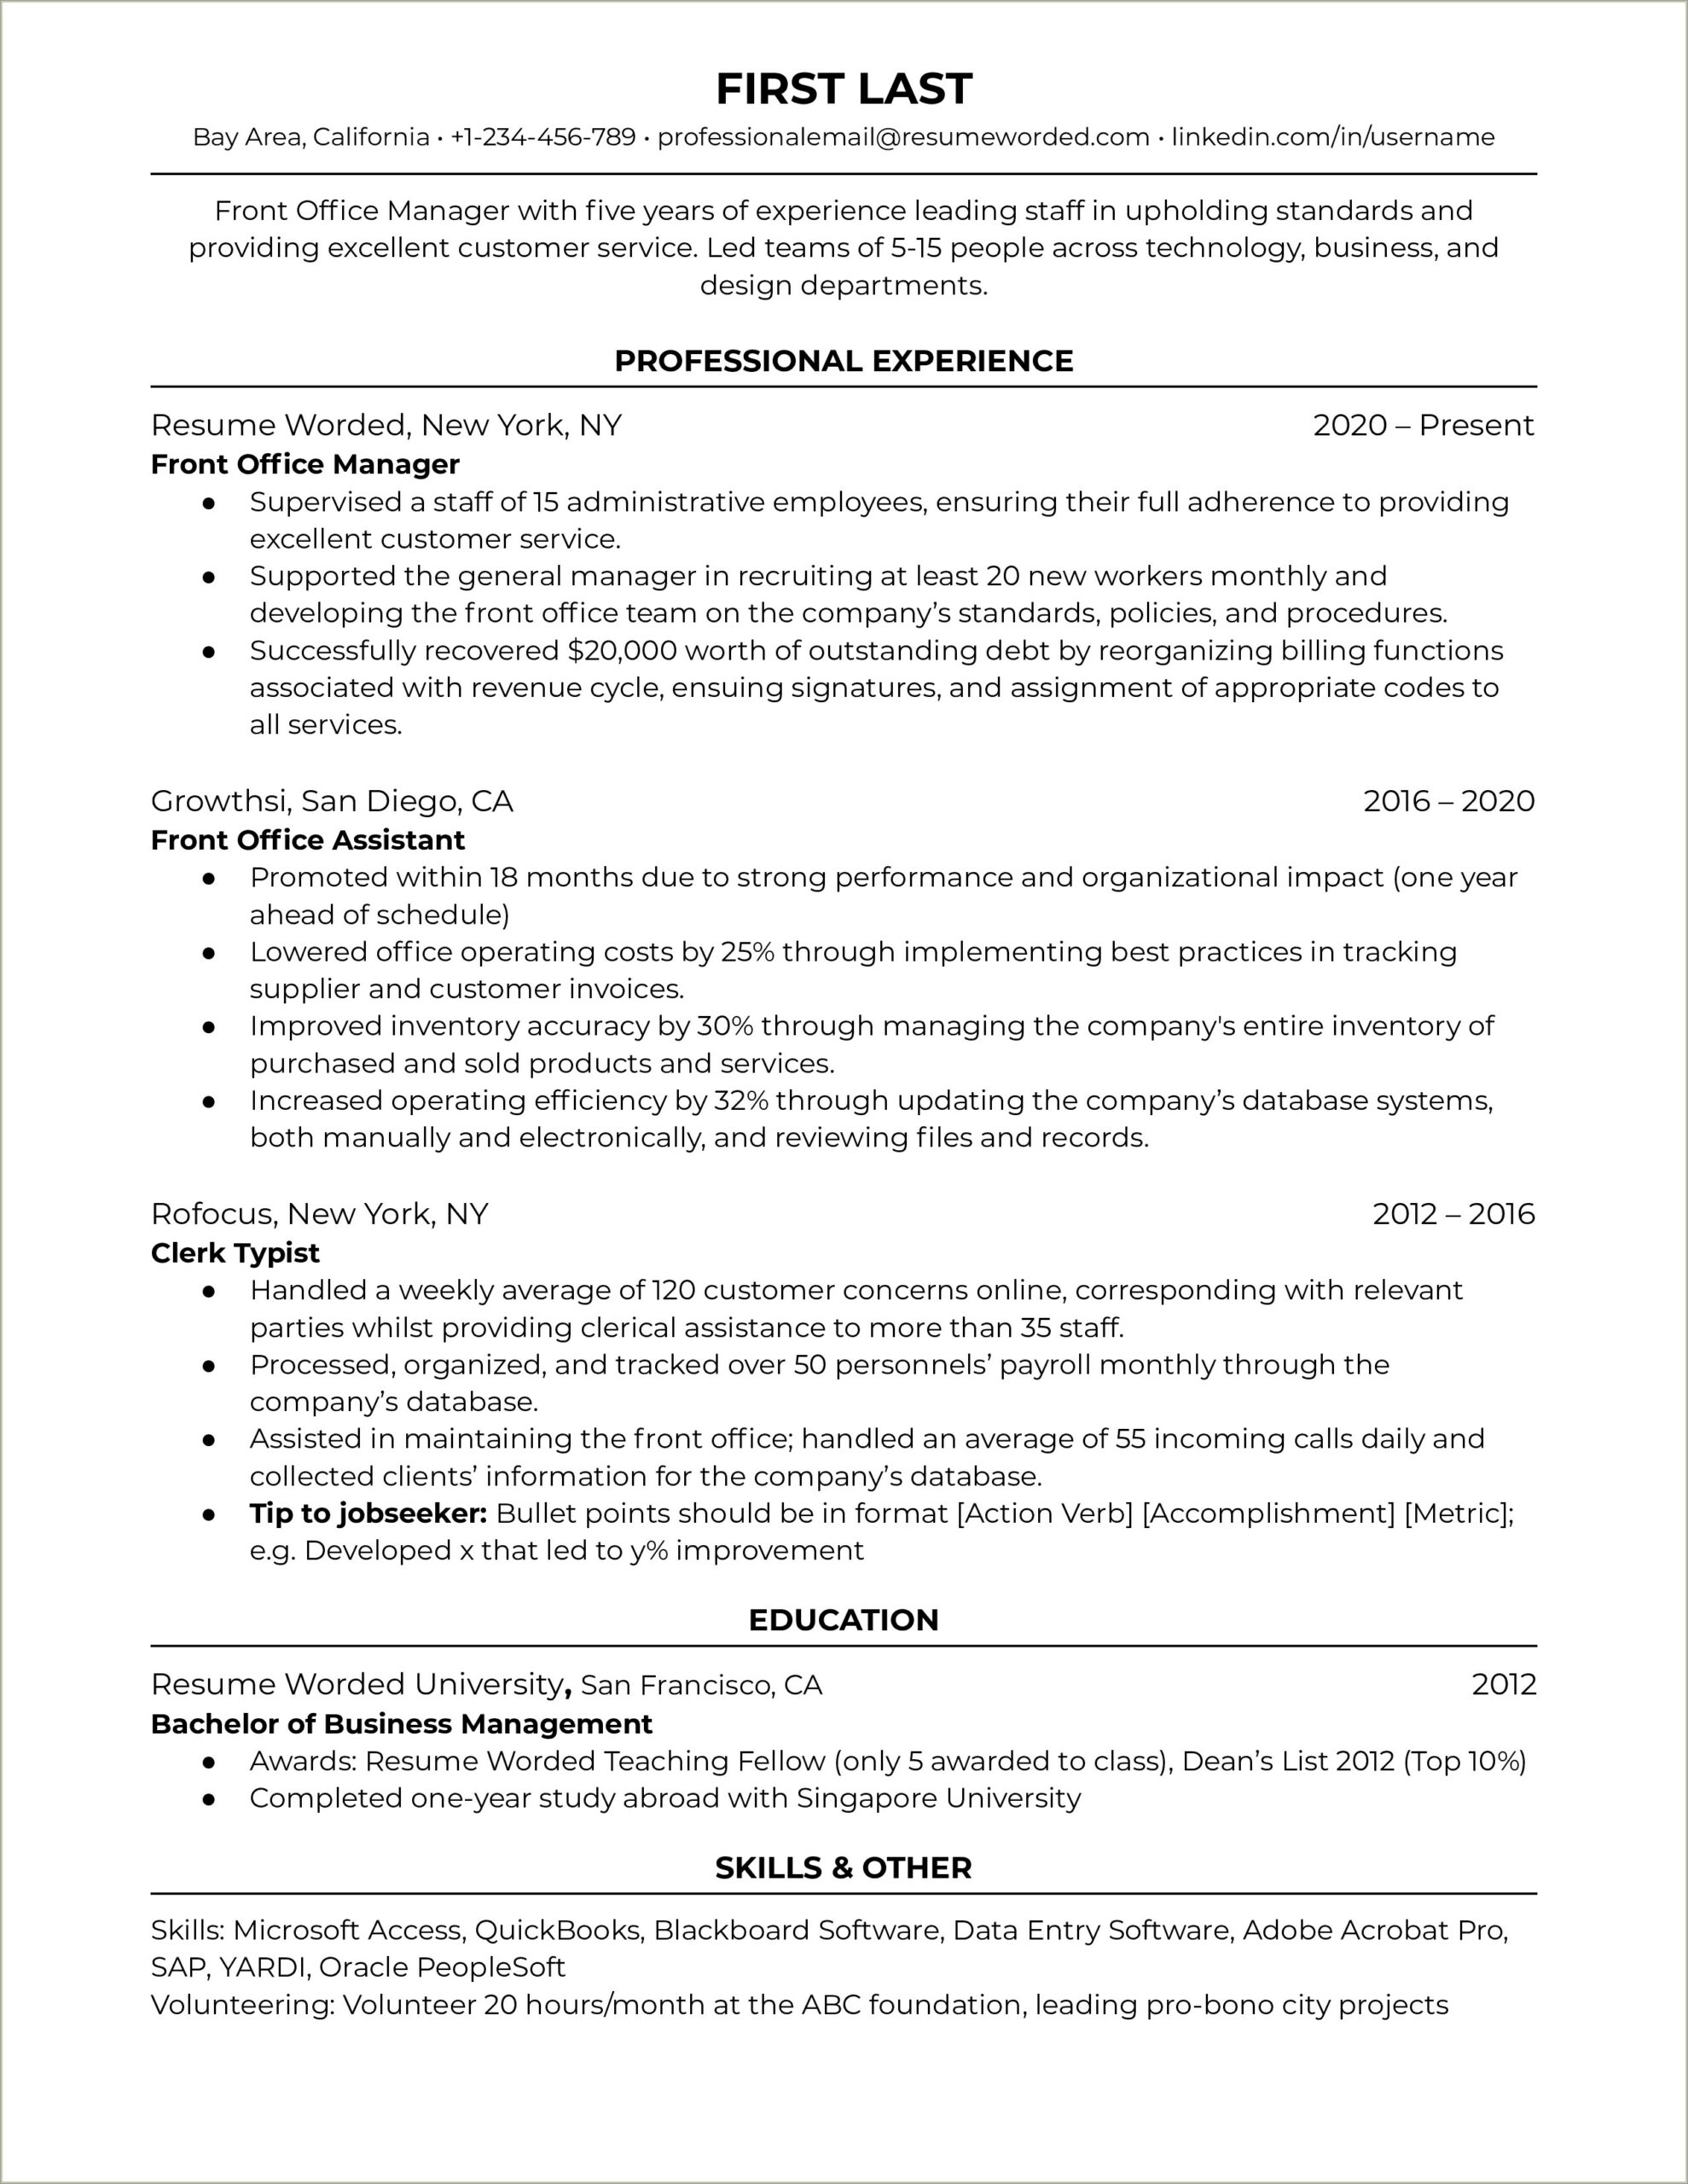 Resume Profile For Customer Service Manager